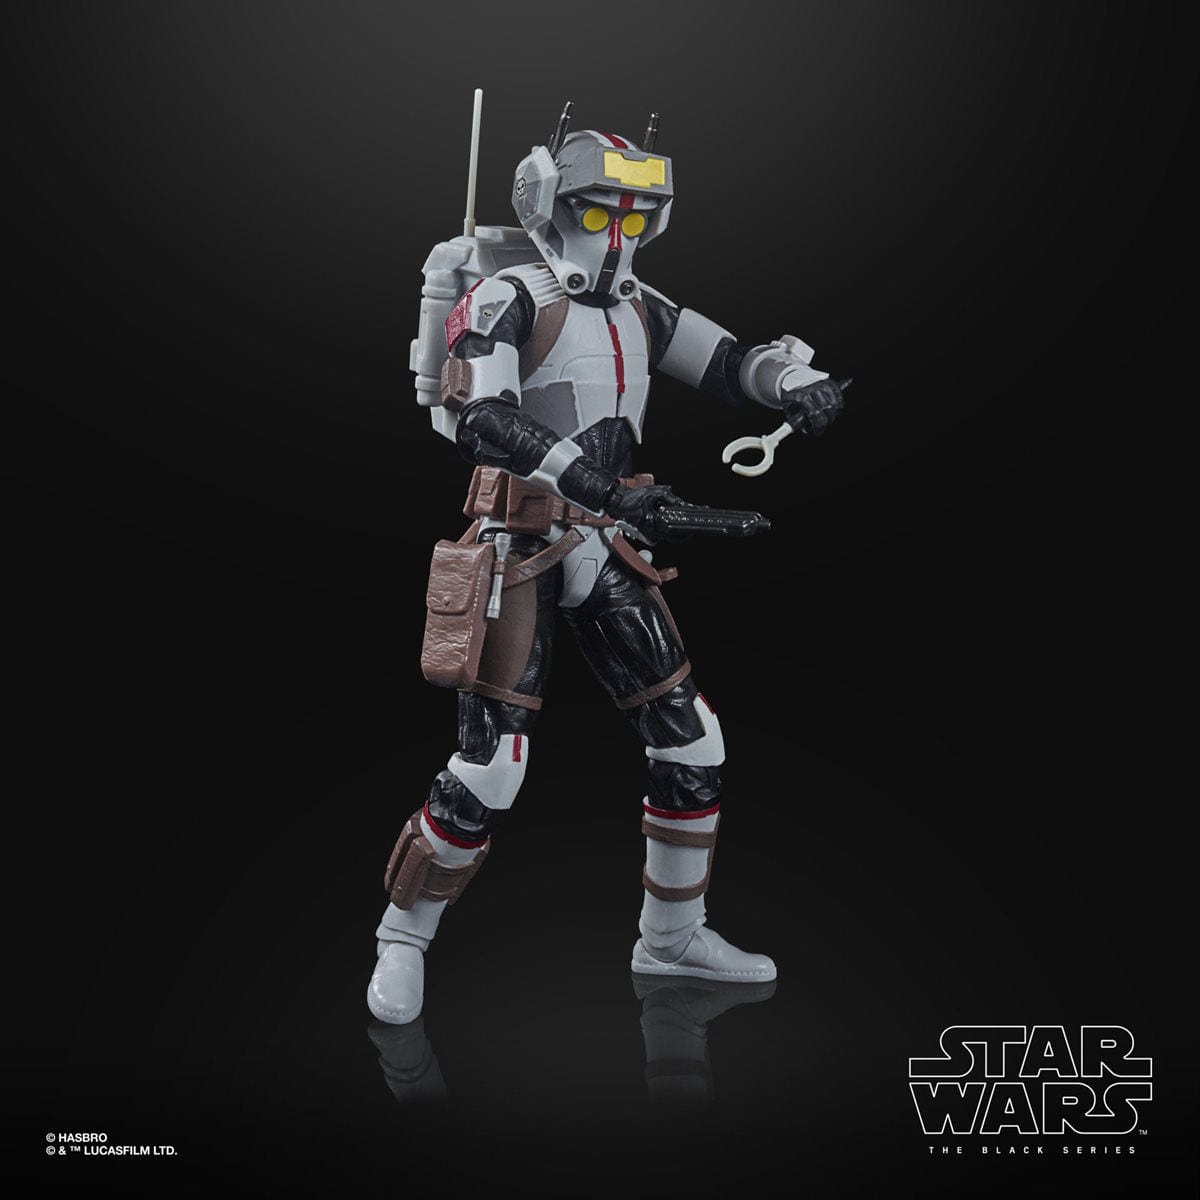 Star Wars The Black Series Tech Toy 6-Inch-Scale Star Wars: The Bad Batch Collectible Figure Media 6 of 10